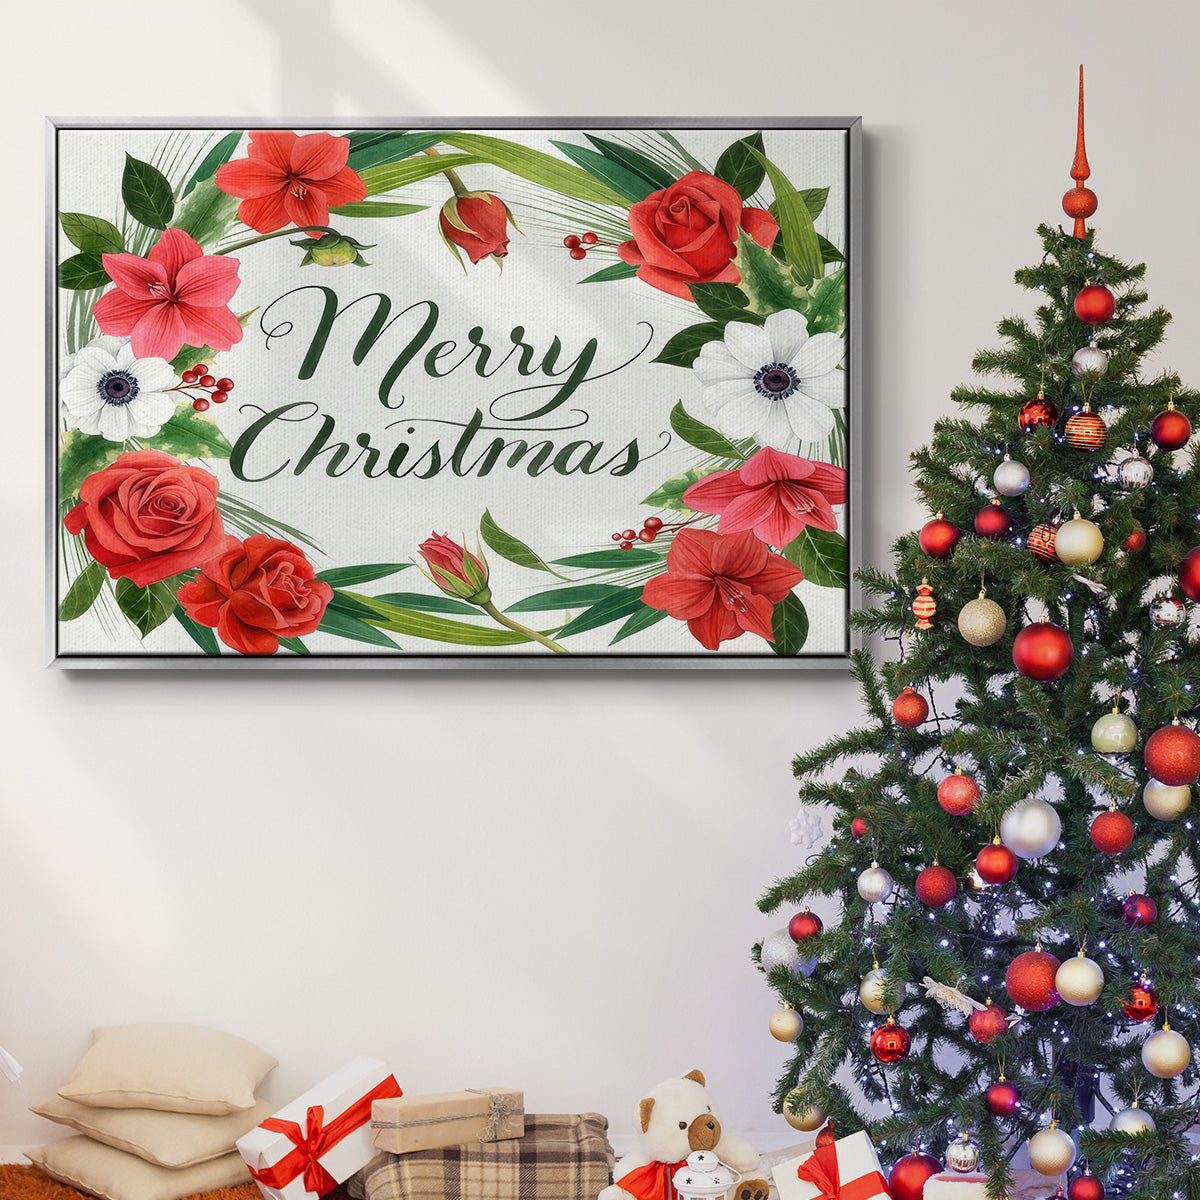 Christmas Flora Wreath Collection A - Framed Gallery Wrapped Canvas in Floating Frame